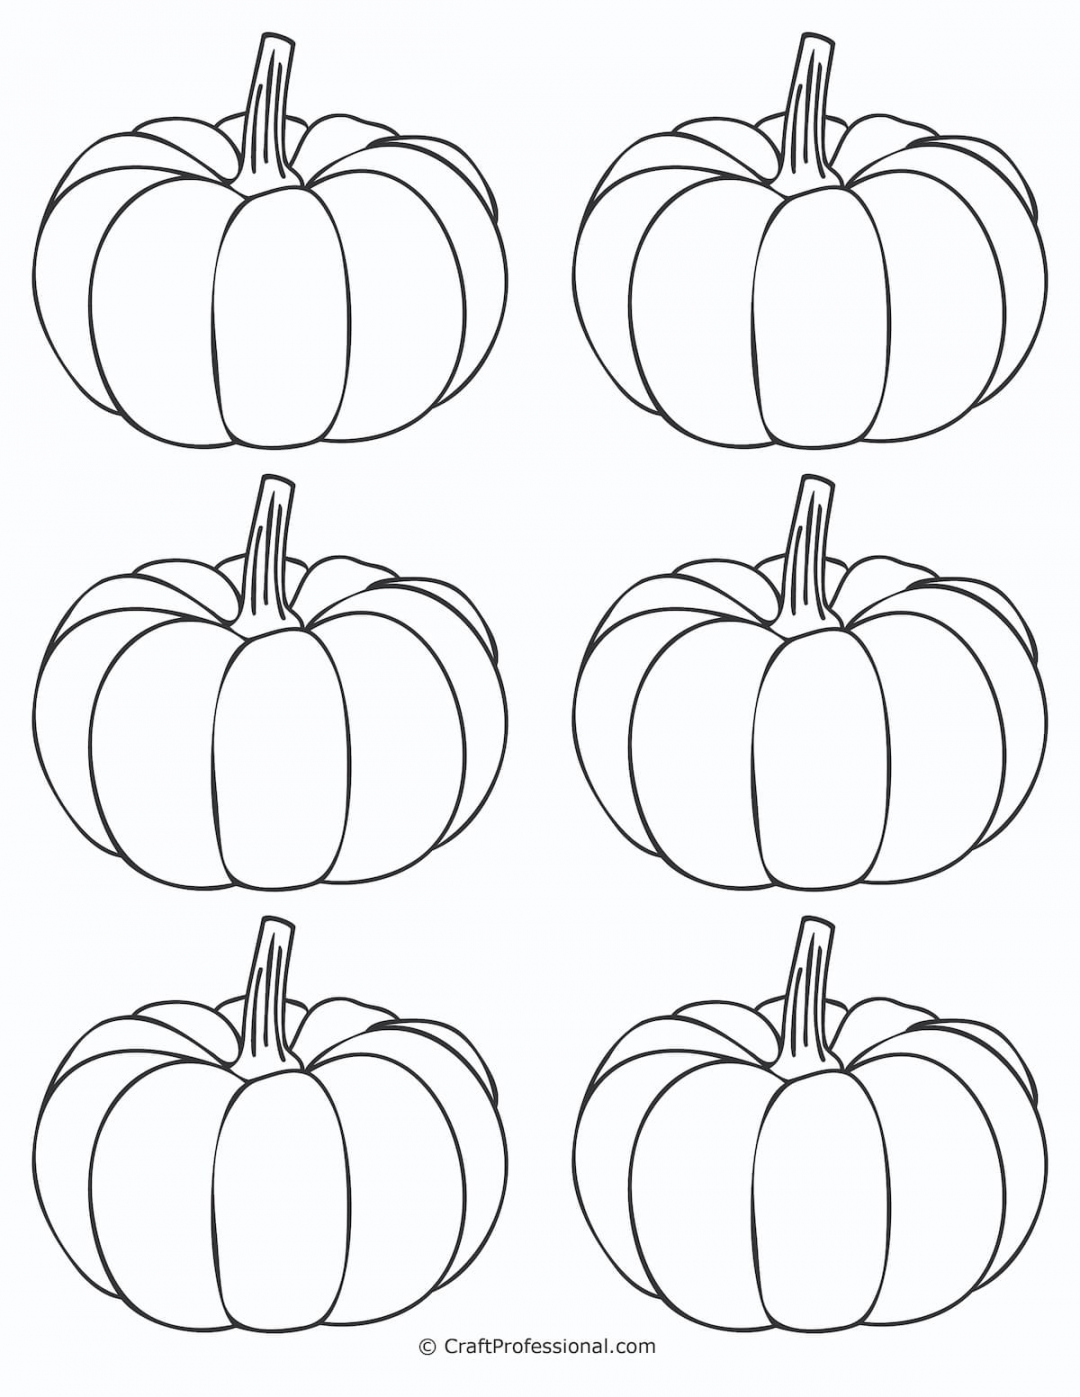 Pumpkin Coloring Pages - Free Printables for Kids & Adults to Color - FREE Printables - Free Printable Pumpkin Coloring Pages